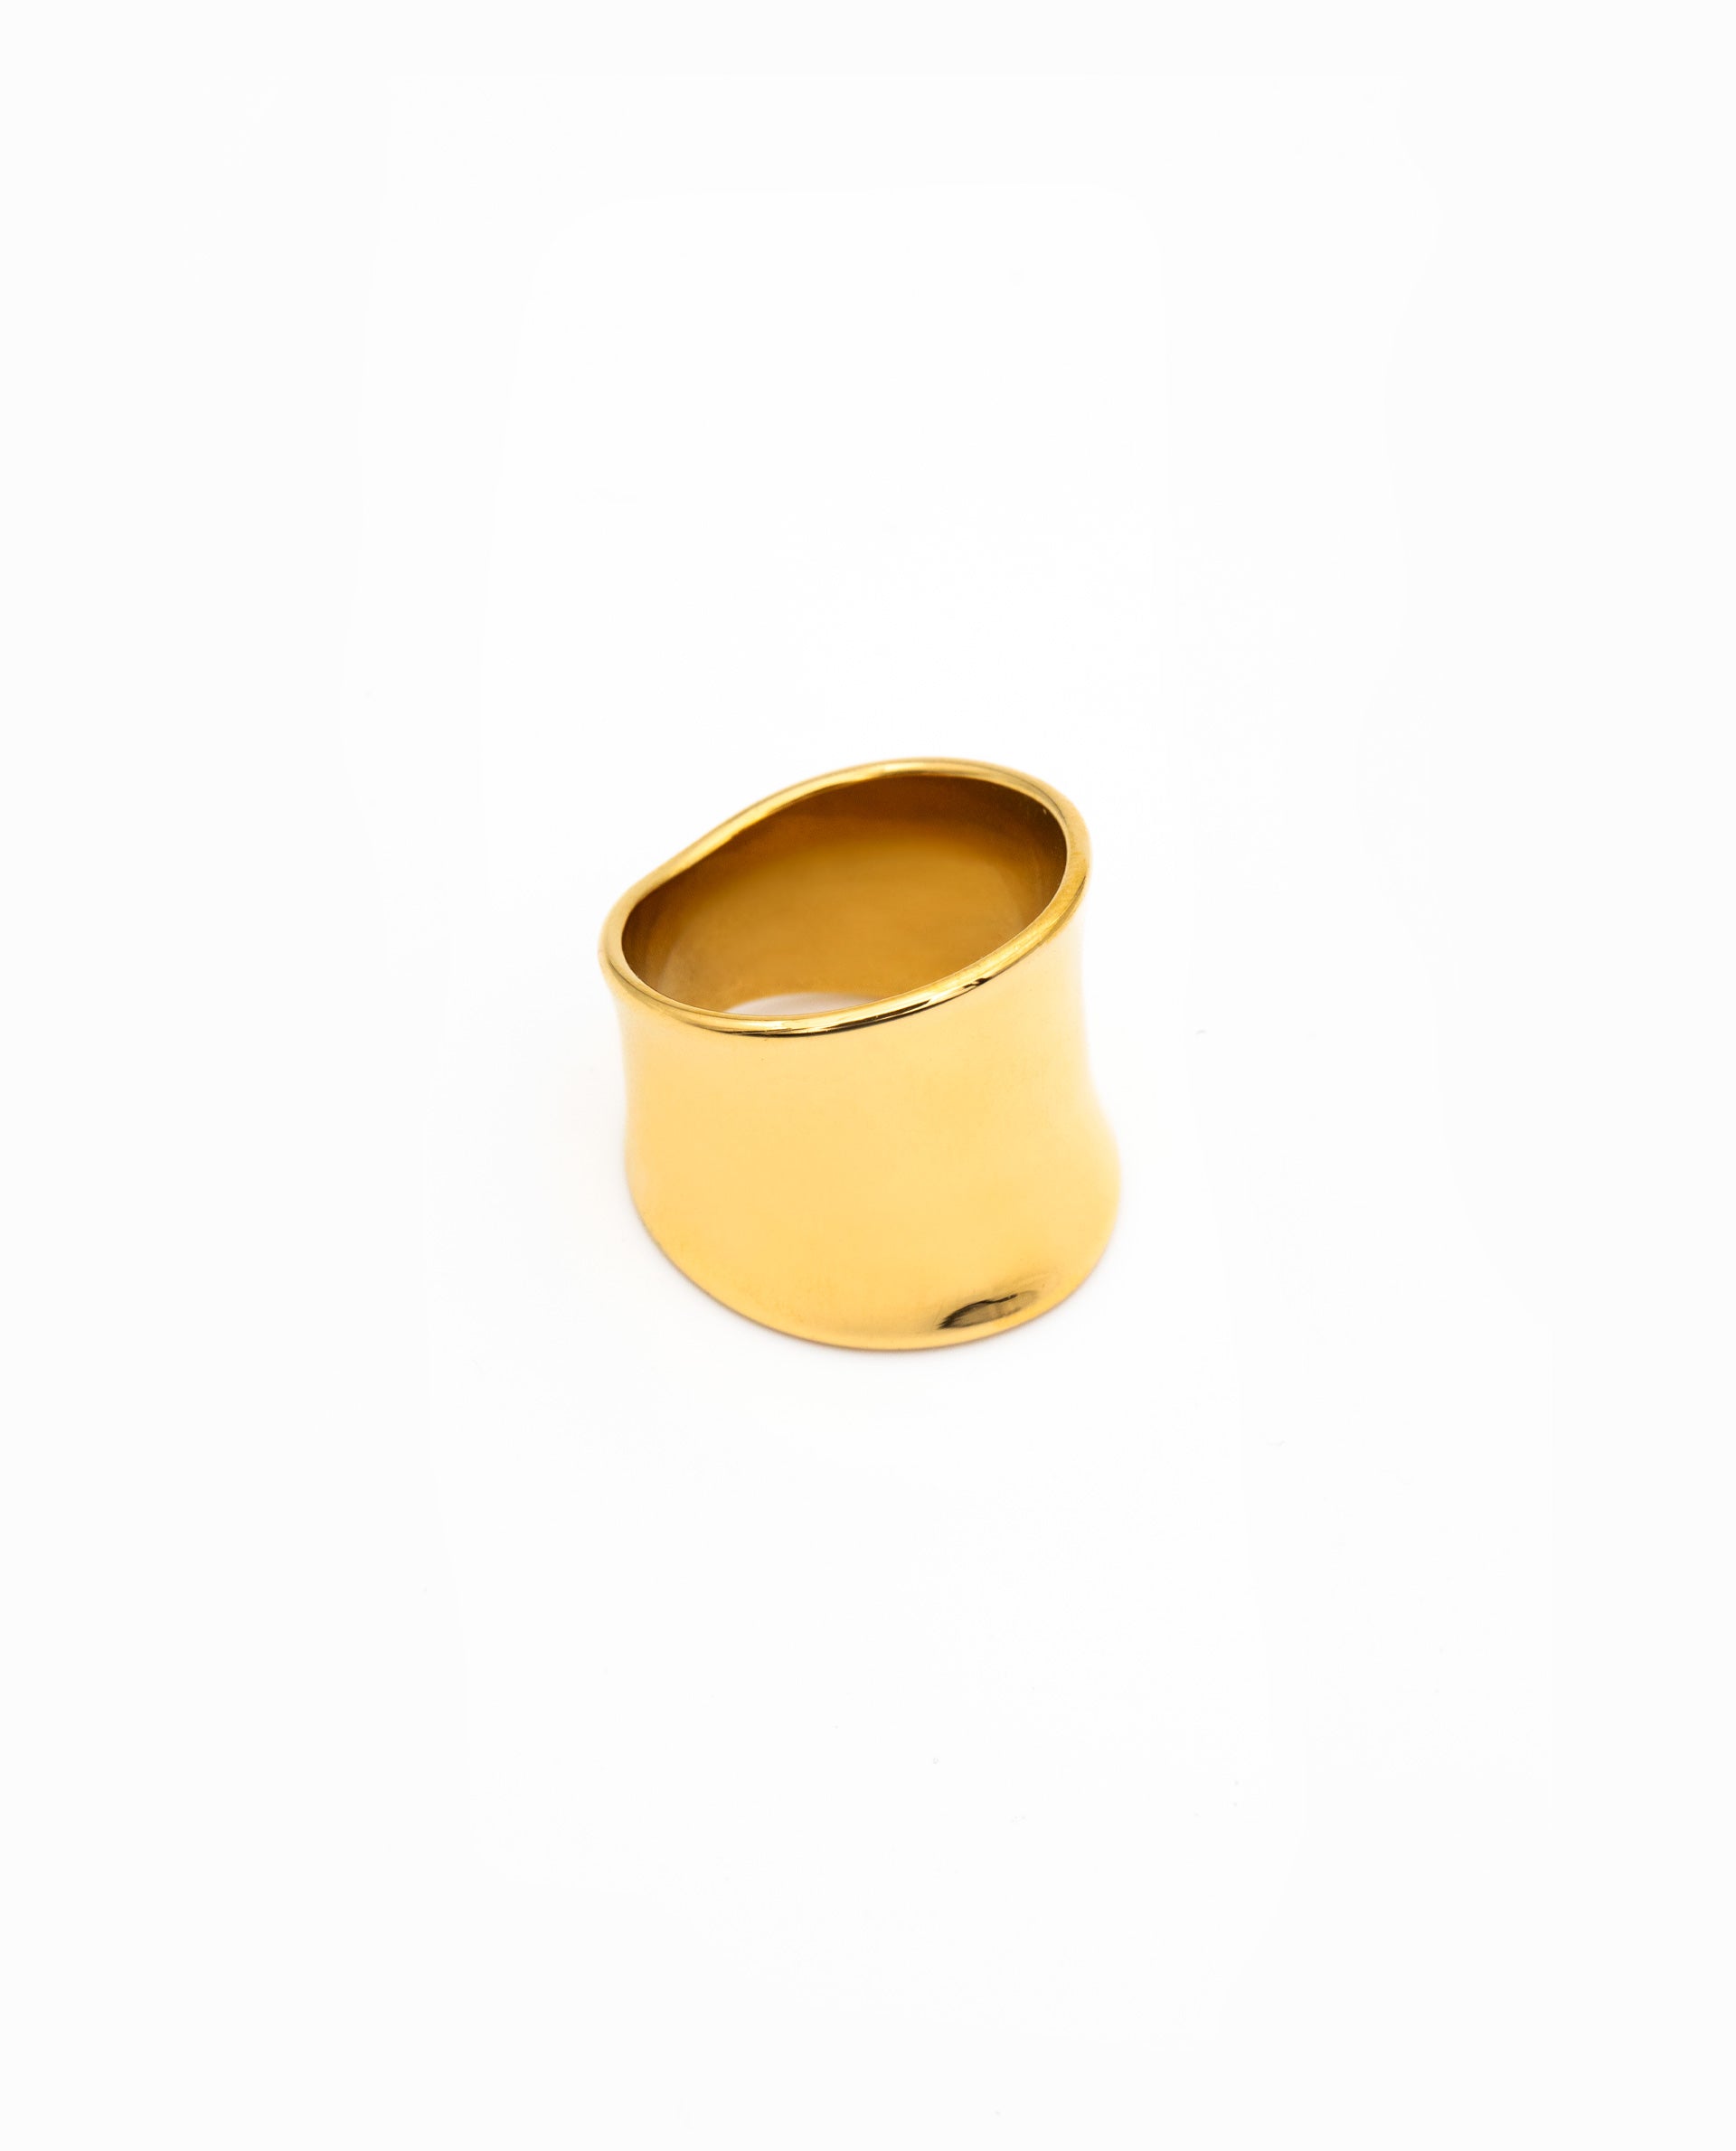 MIRROR RING - GOLD PLATED STEEL